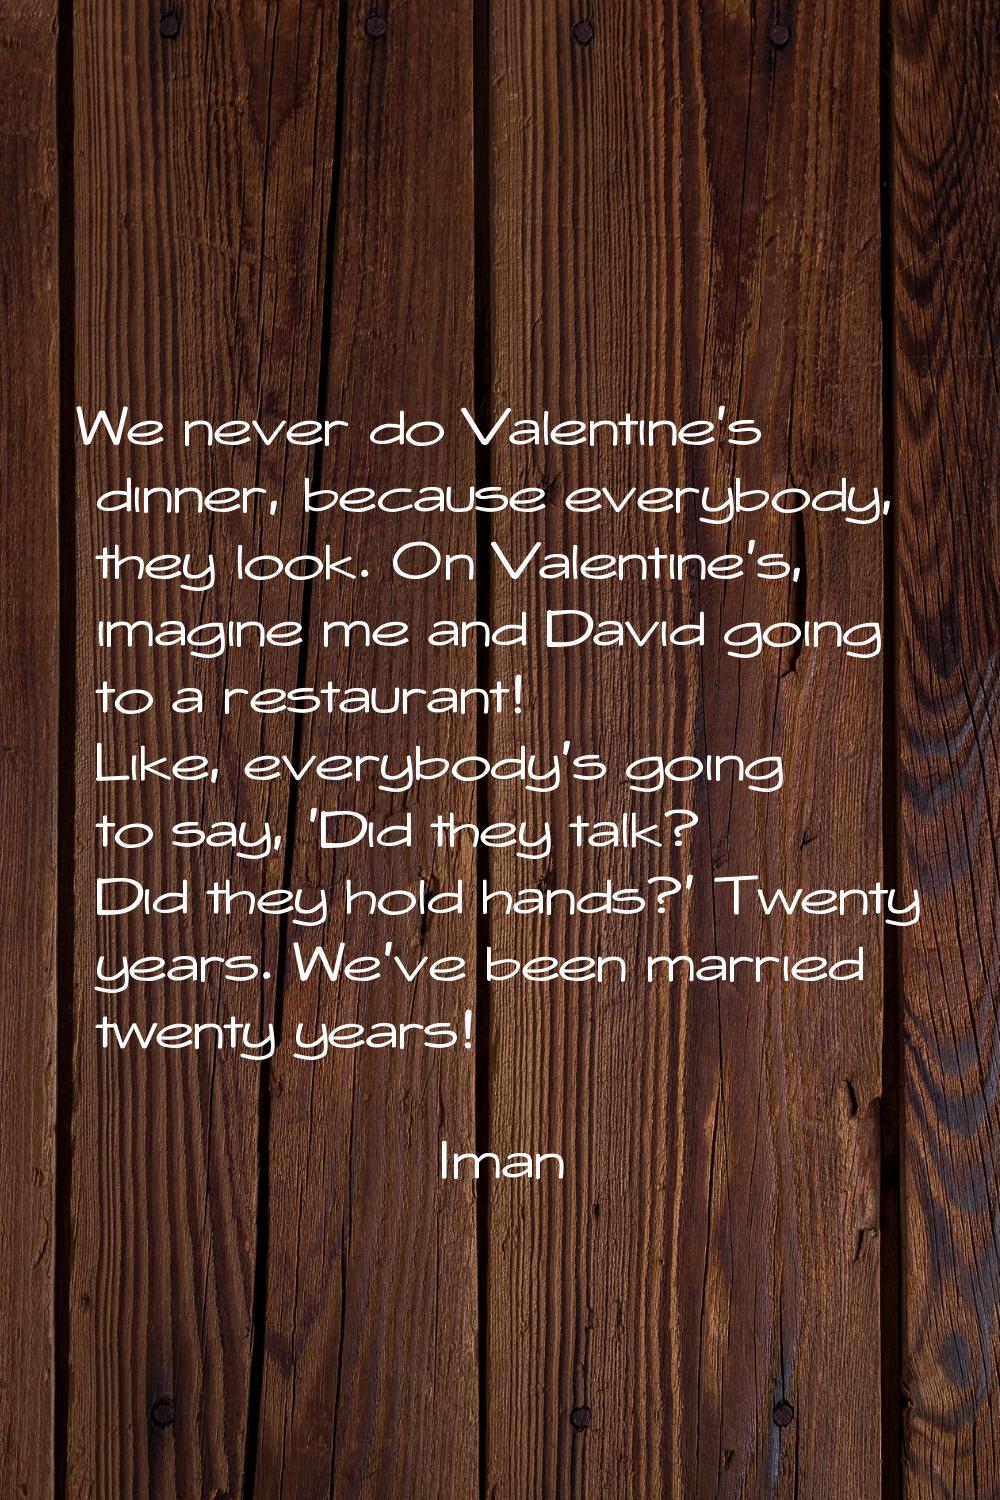 We never do Valentine's dinner, because everybody, they look. On Valentine's, imagine me and David 